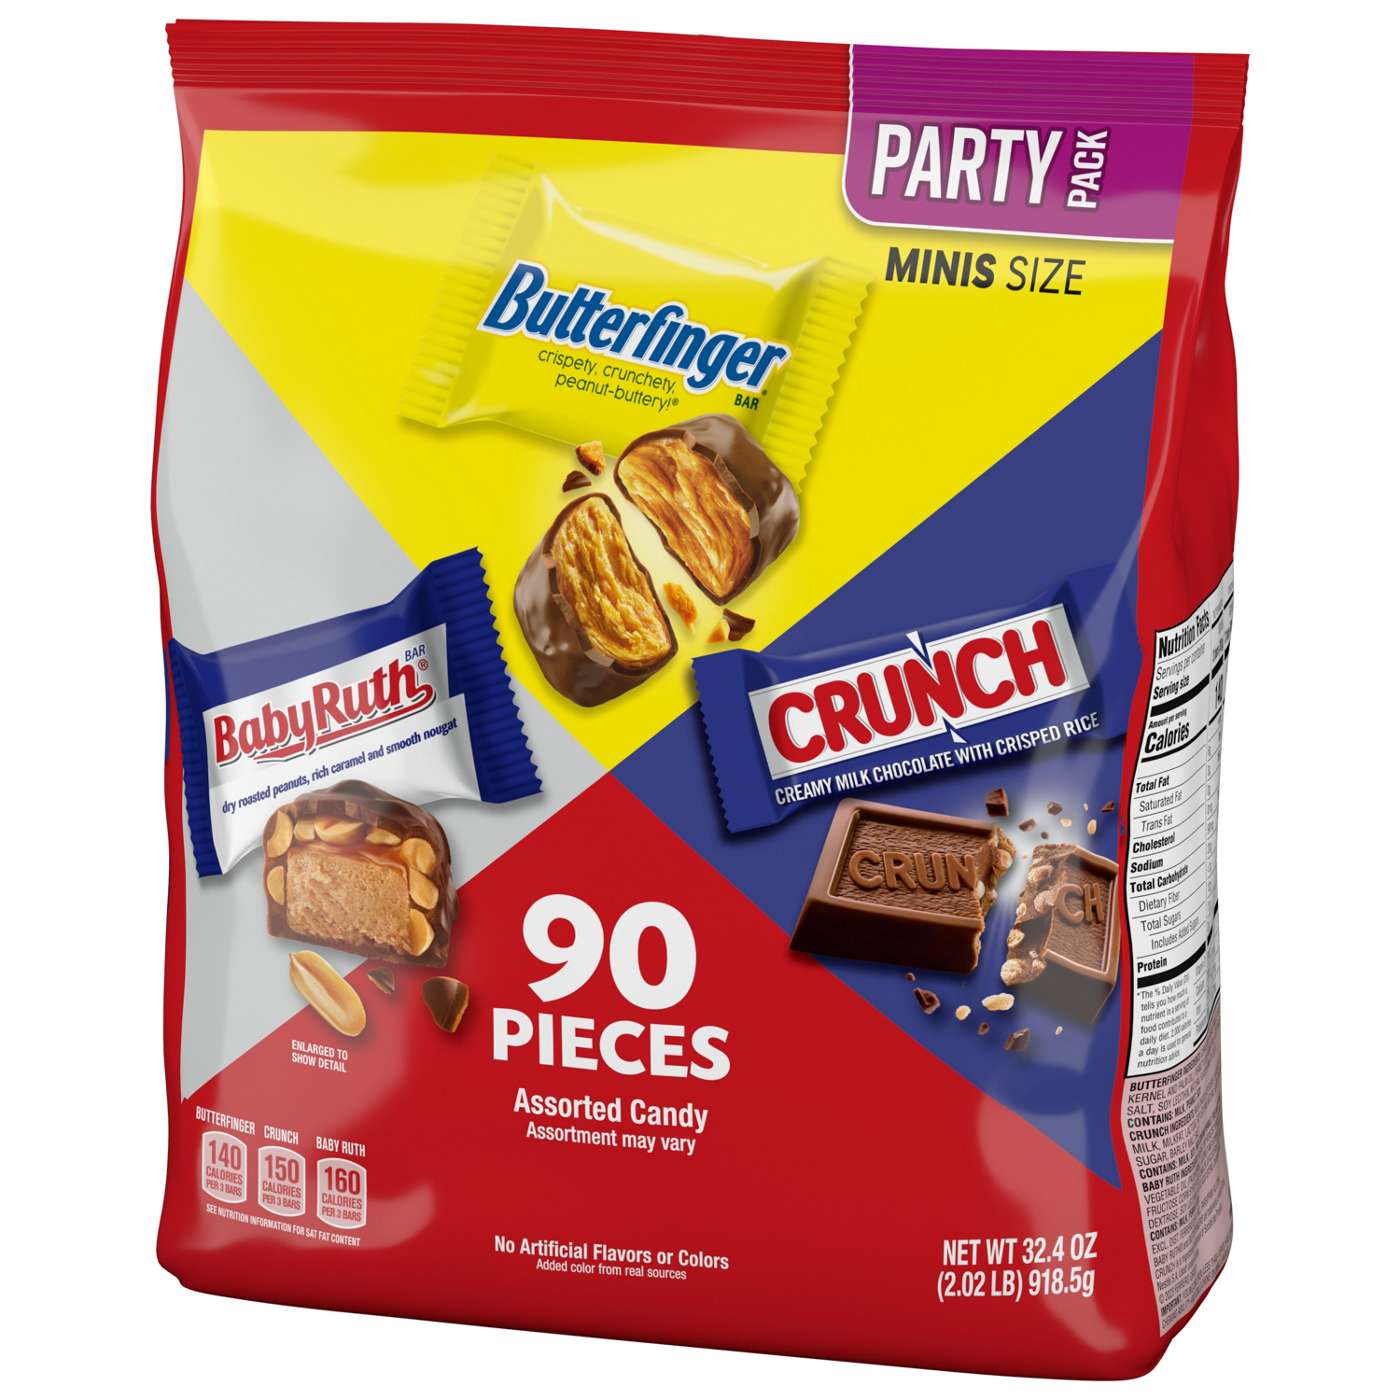 Crunch, Butterfinger, & Baby Ruth Assorted Chocolate Mini Size Candy Bars - Party Pack; image 2 of 8